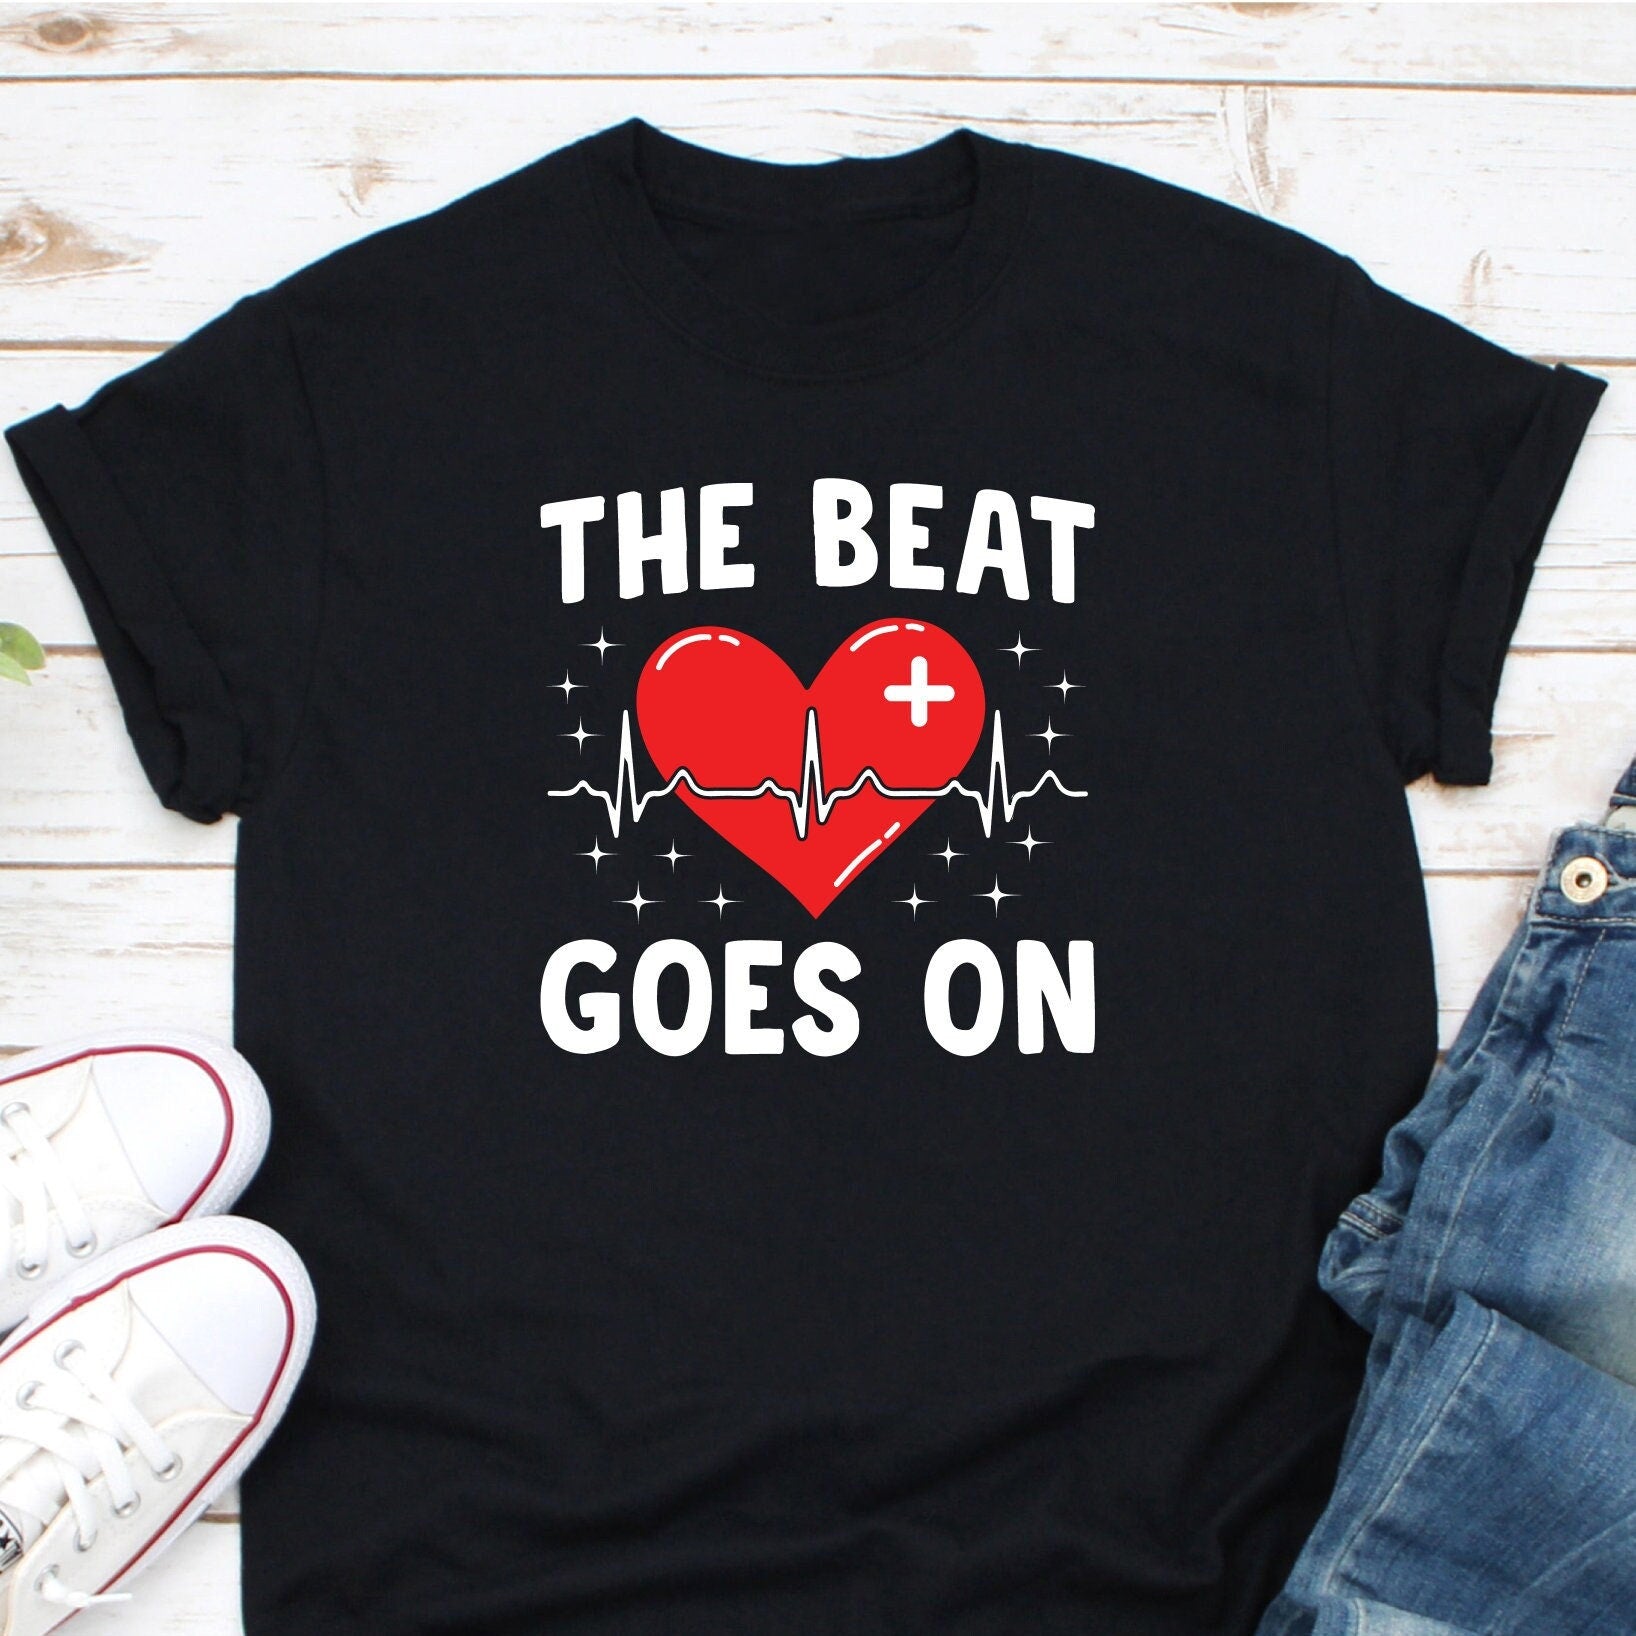 The Beat Goes On Shirt, Open Heart Surgery Shirt, Heartbeats Shirt, Heart Surgery Shirt